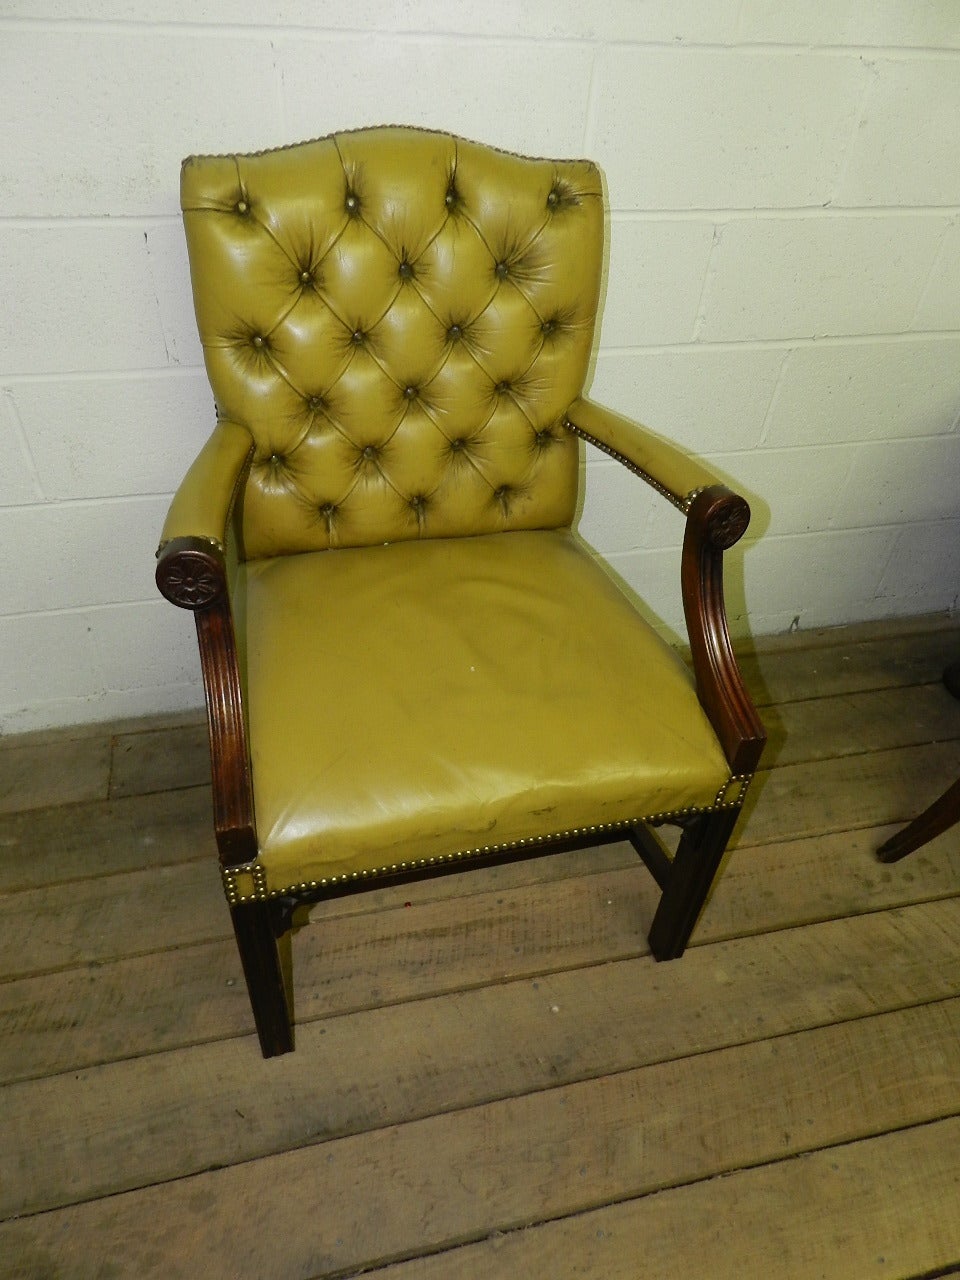 Mahogany framed gainsborough style chair with buttoned and studded leather upholstery.